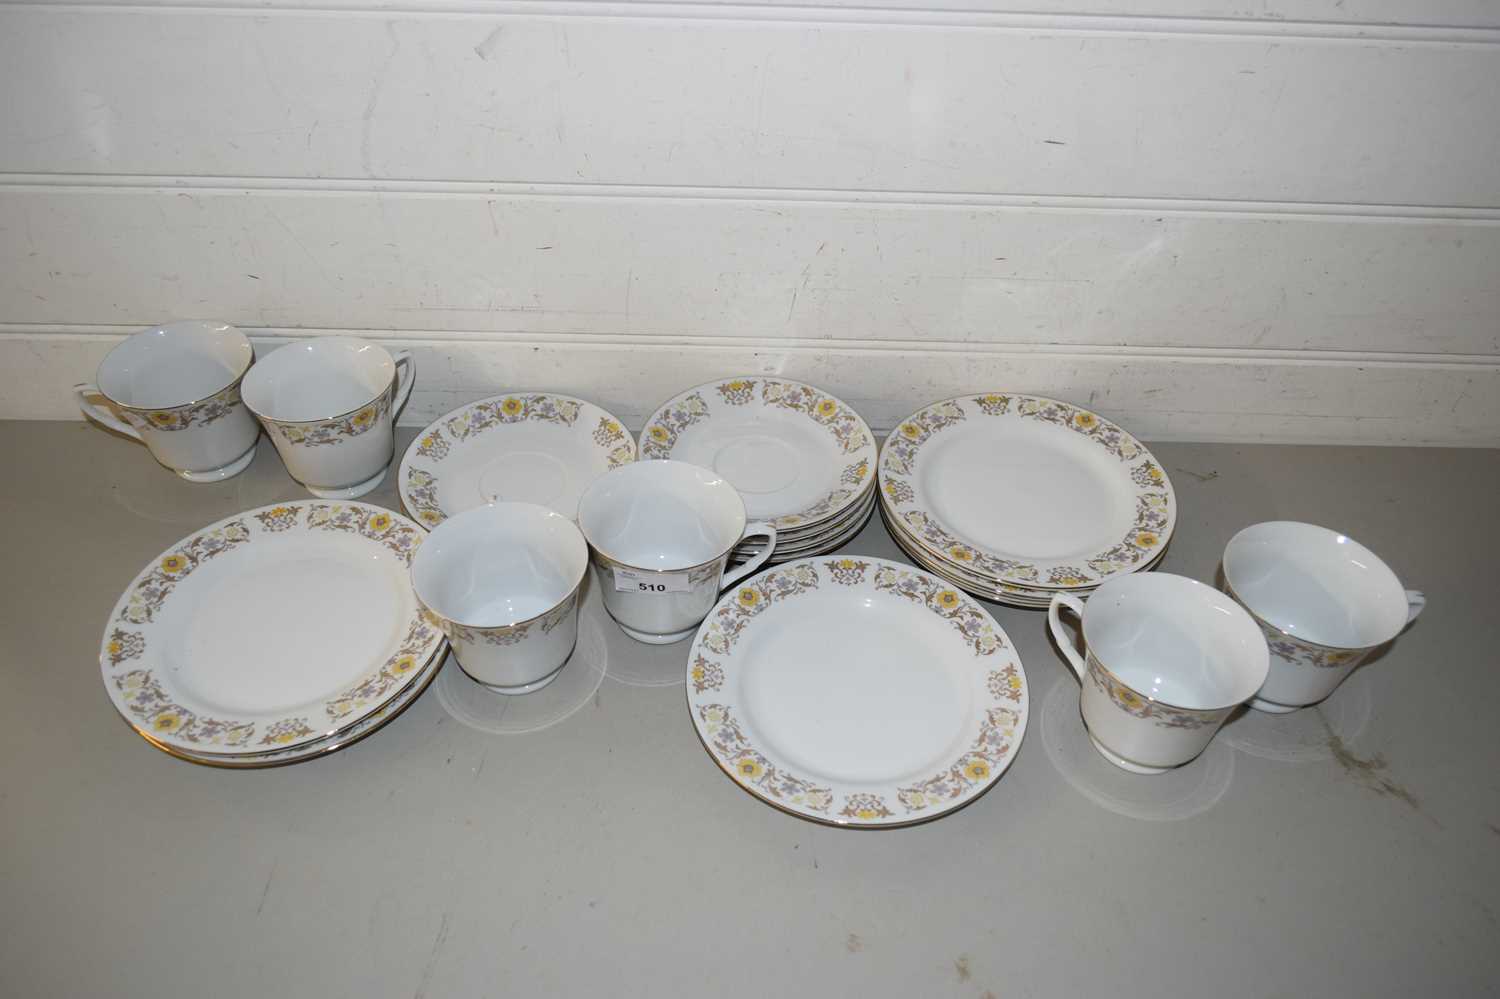 MODERN CHINESE FLORAL DECORATED TEA SET